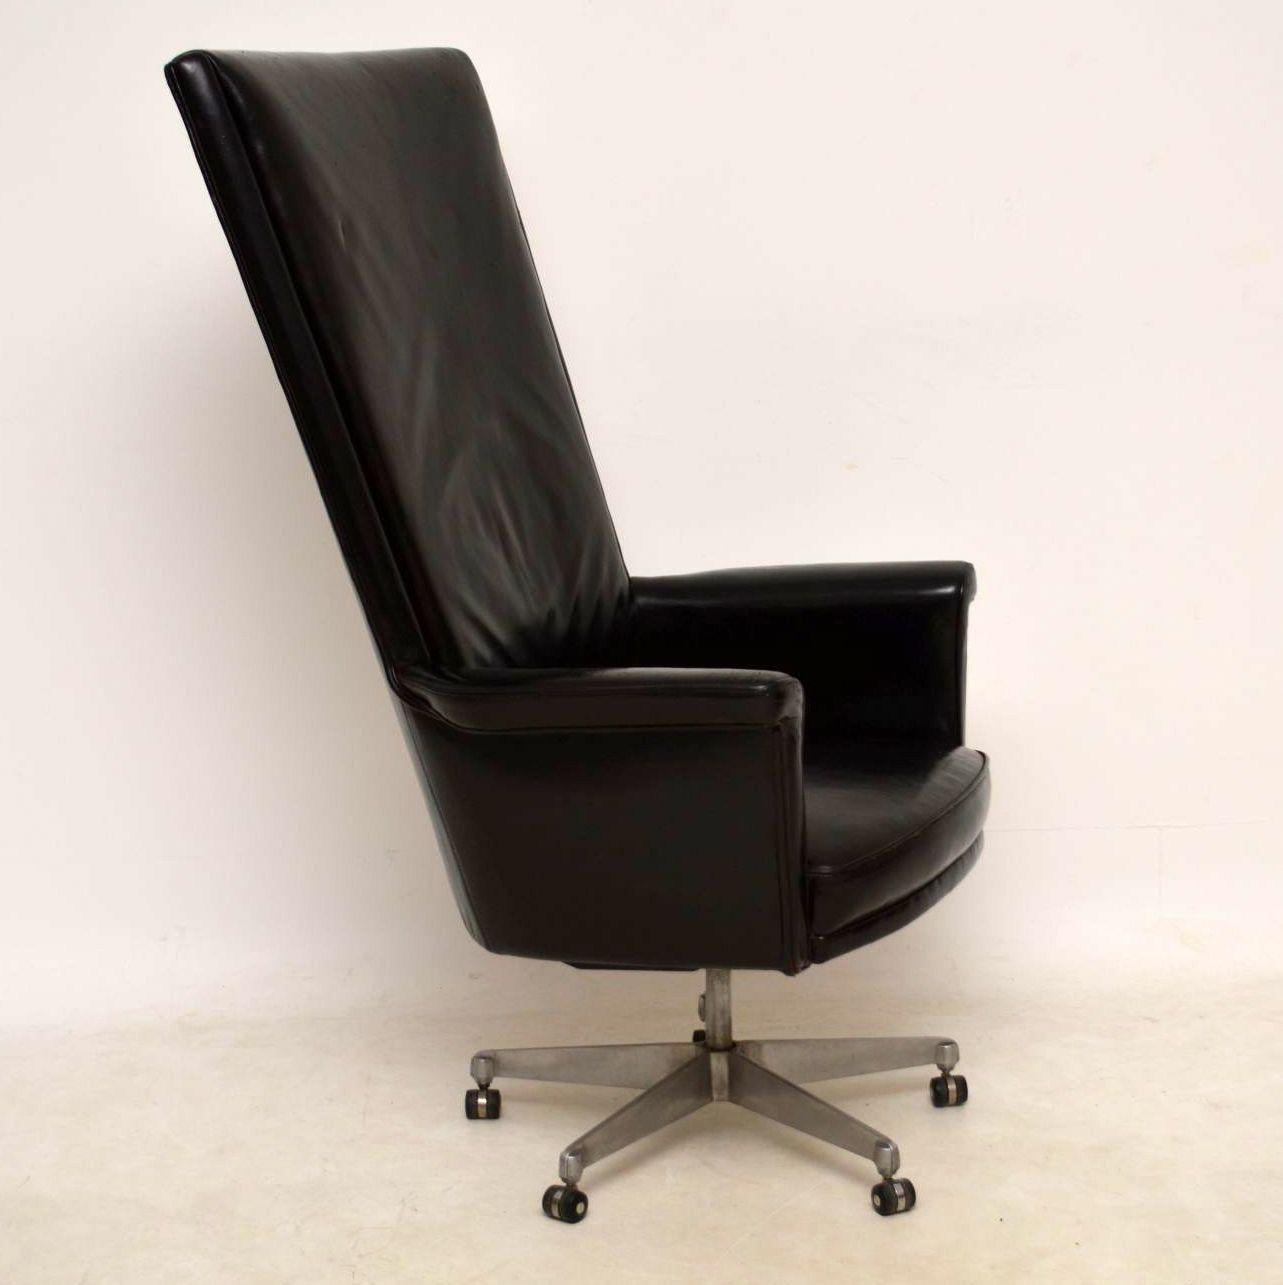 This vintage leather desk chair was made by Howard Keith in the 1960s, it was designed by John Home and is called the ‘Trend’ chair. It’s very rare and extremely impressive, with a super high back, sitting on a splayed brush steel base. The